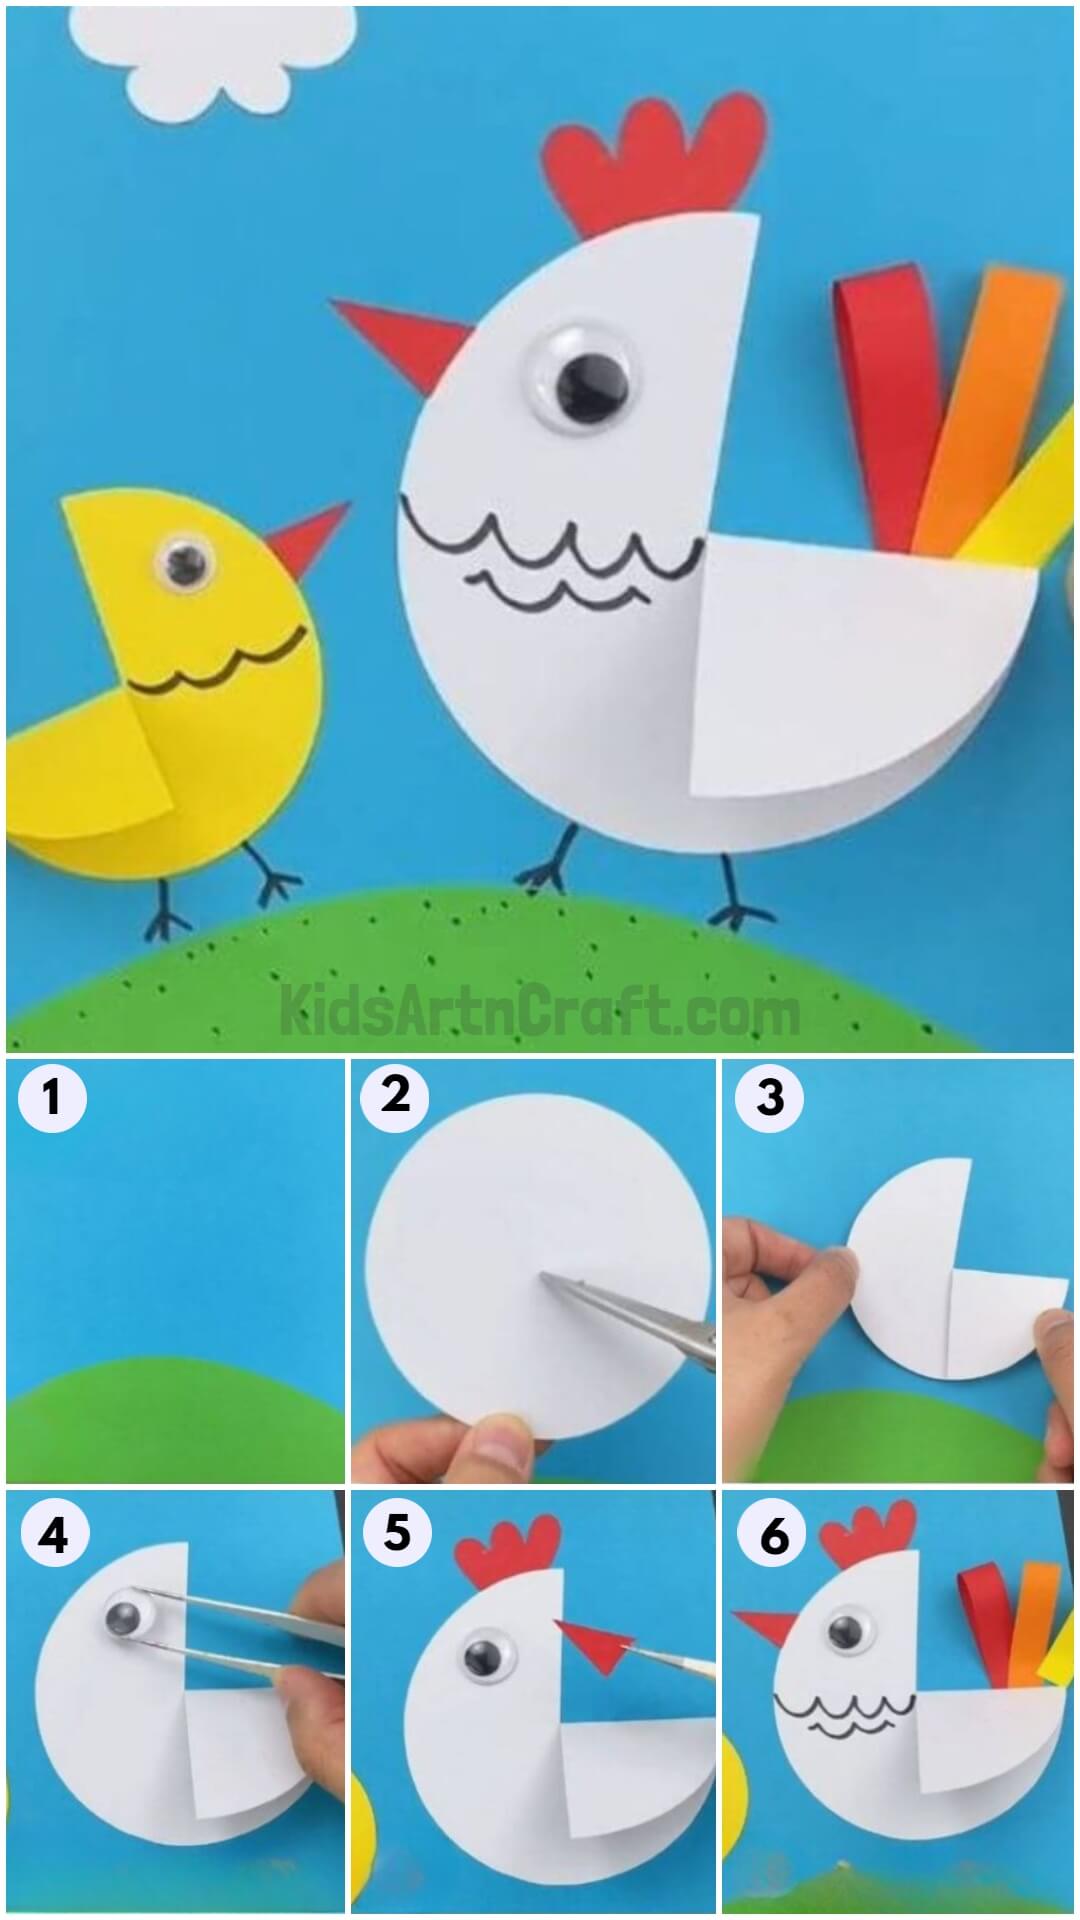 How to Make Paper Circle Hen and Chick Craft - Step by Step Instructions